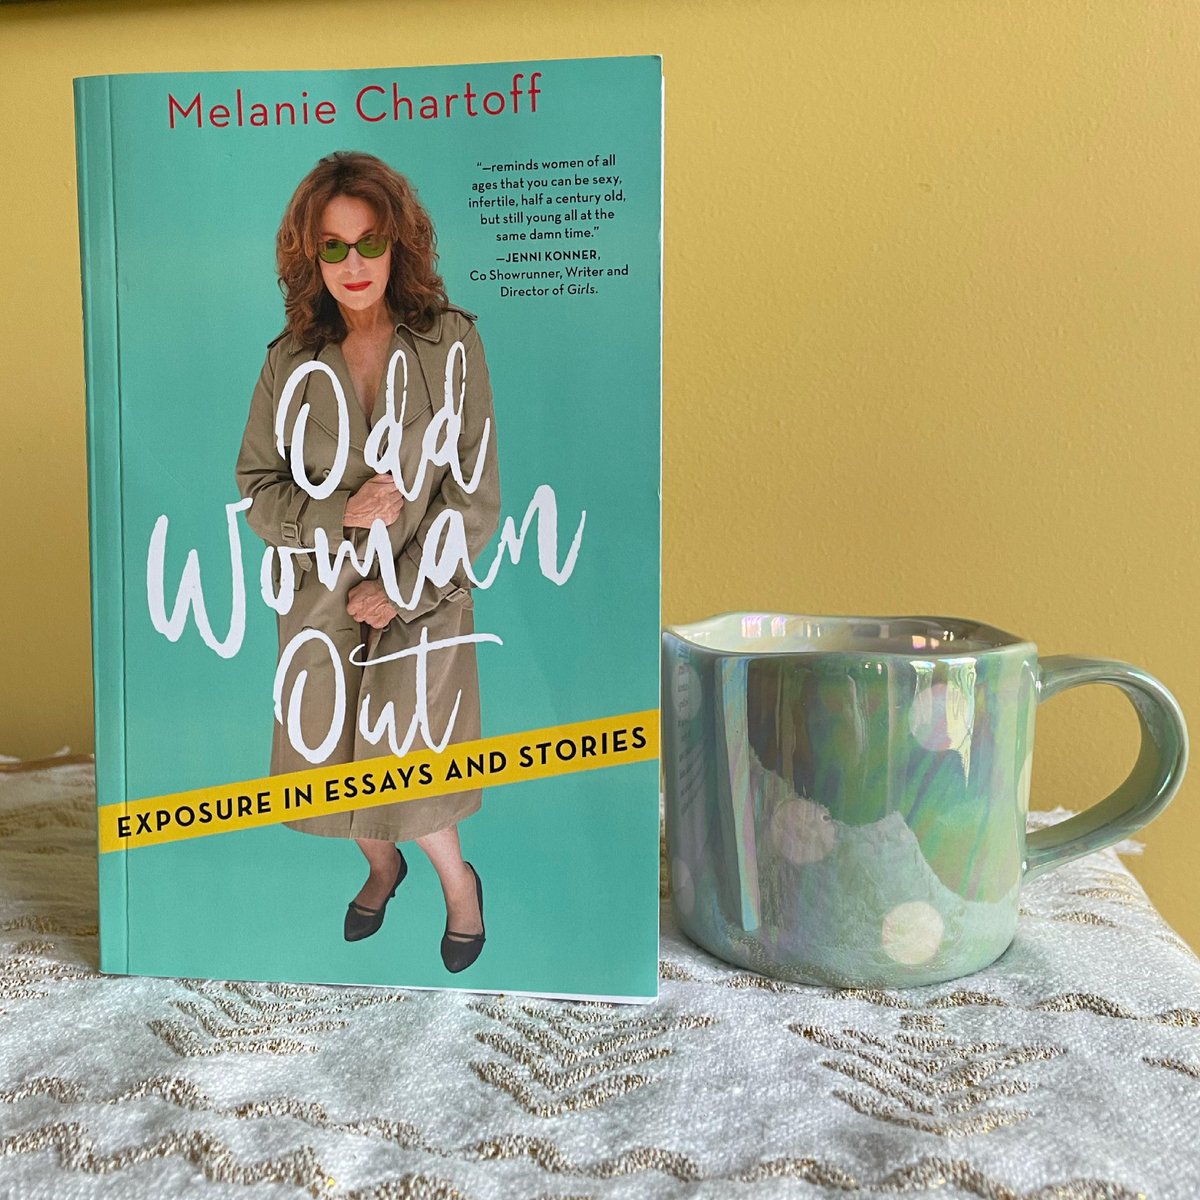 It’s Monday and I am having #CoffeeAndCurrentlyReading the memoir Odd Woman Out!  There’s nothing this lady hasn’t done. GoGo Dancer, Broadway actress, voice actor, and now author!  I love memoirs and I enjoyed this one by @melaniechartoff !